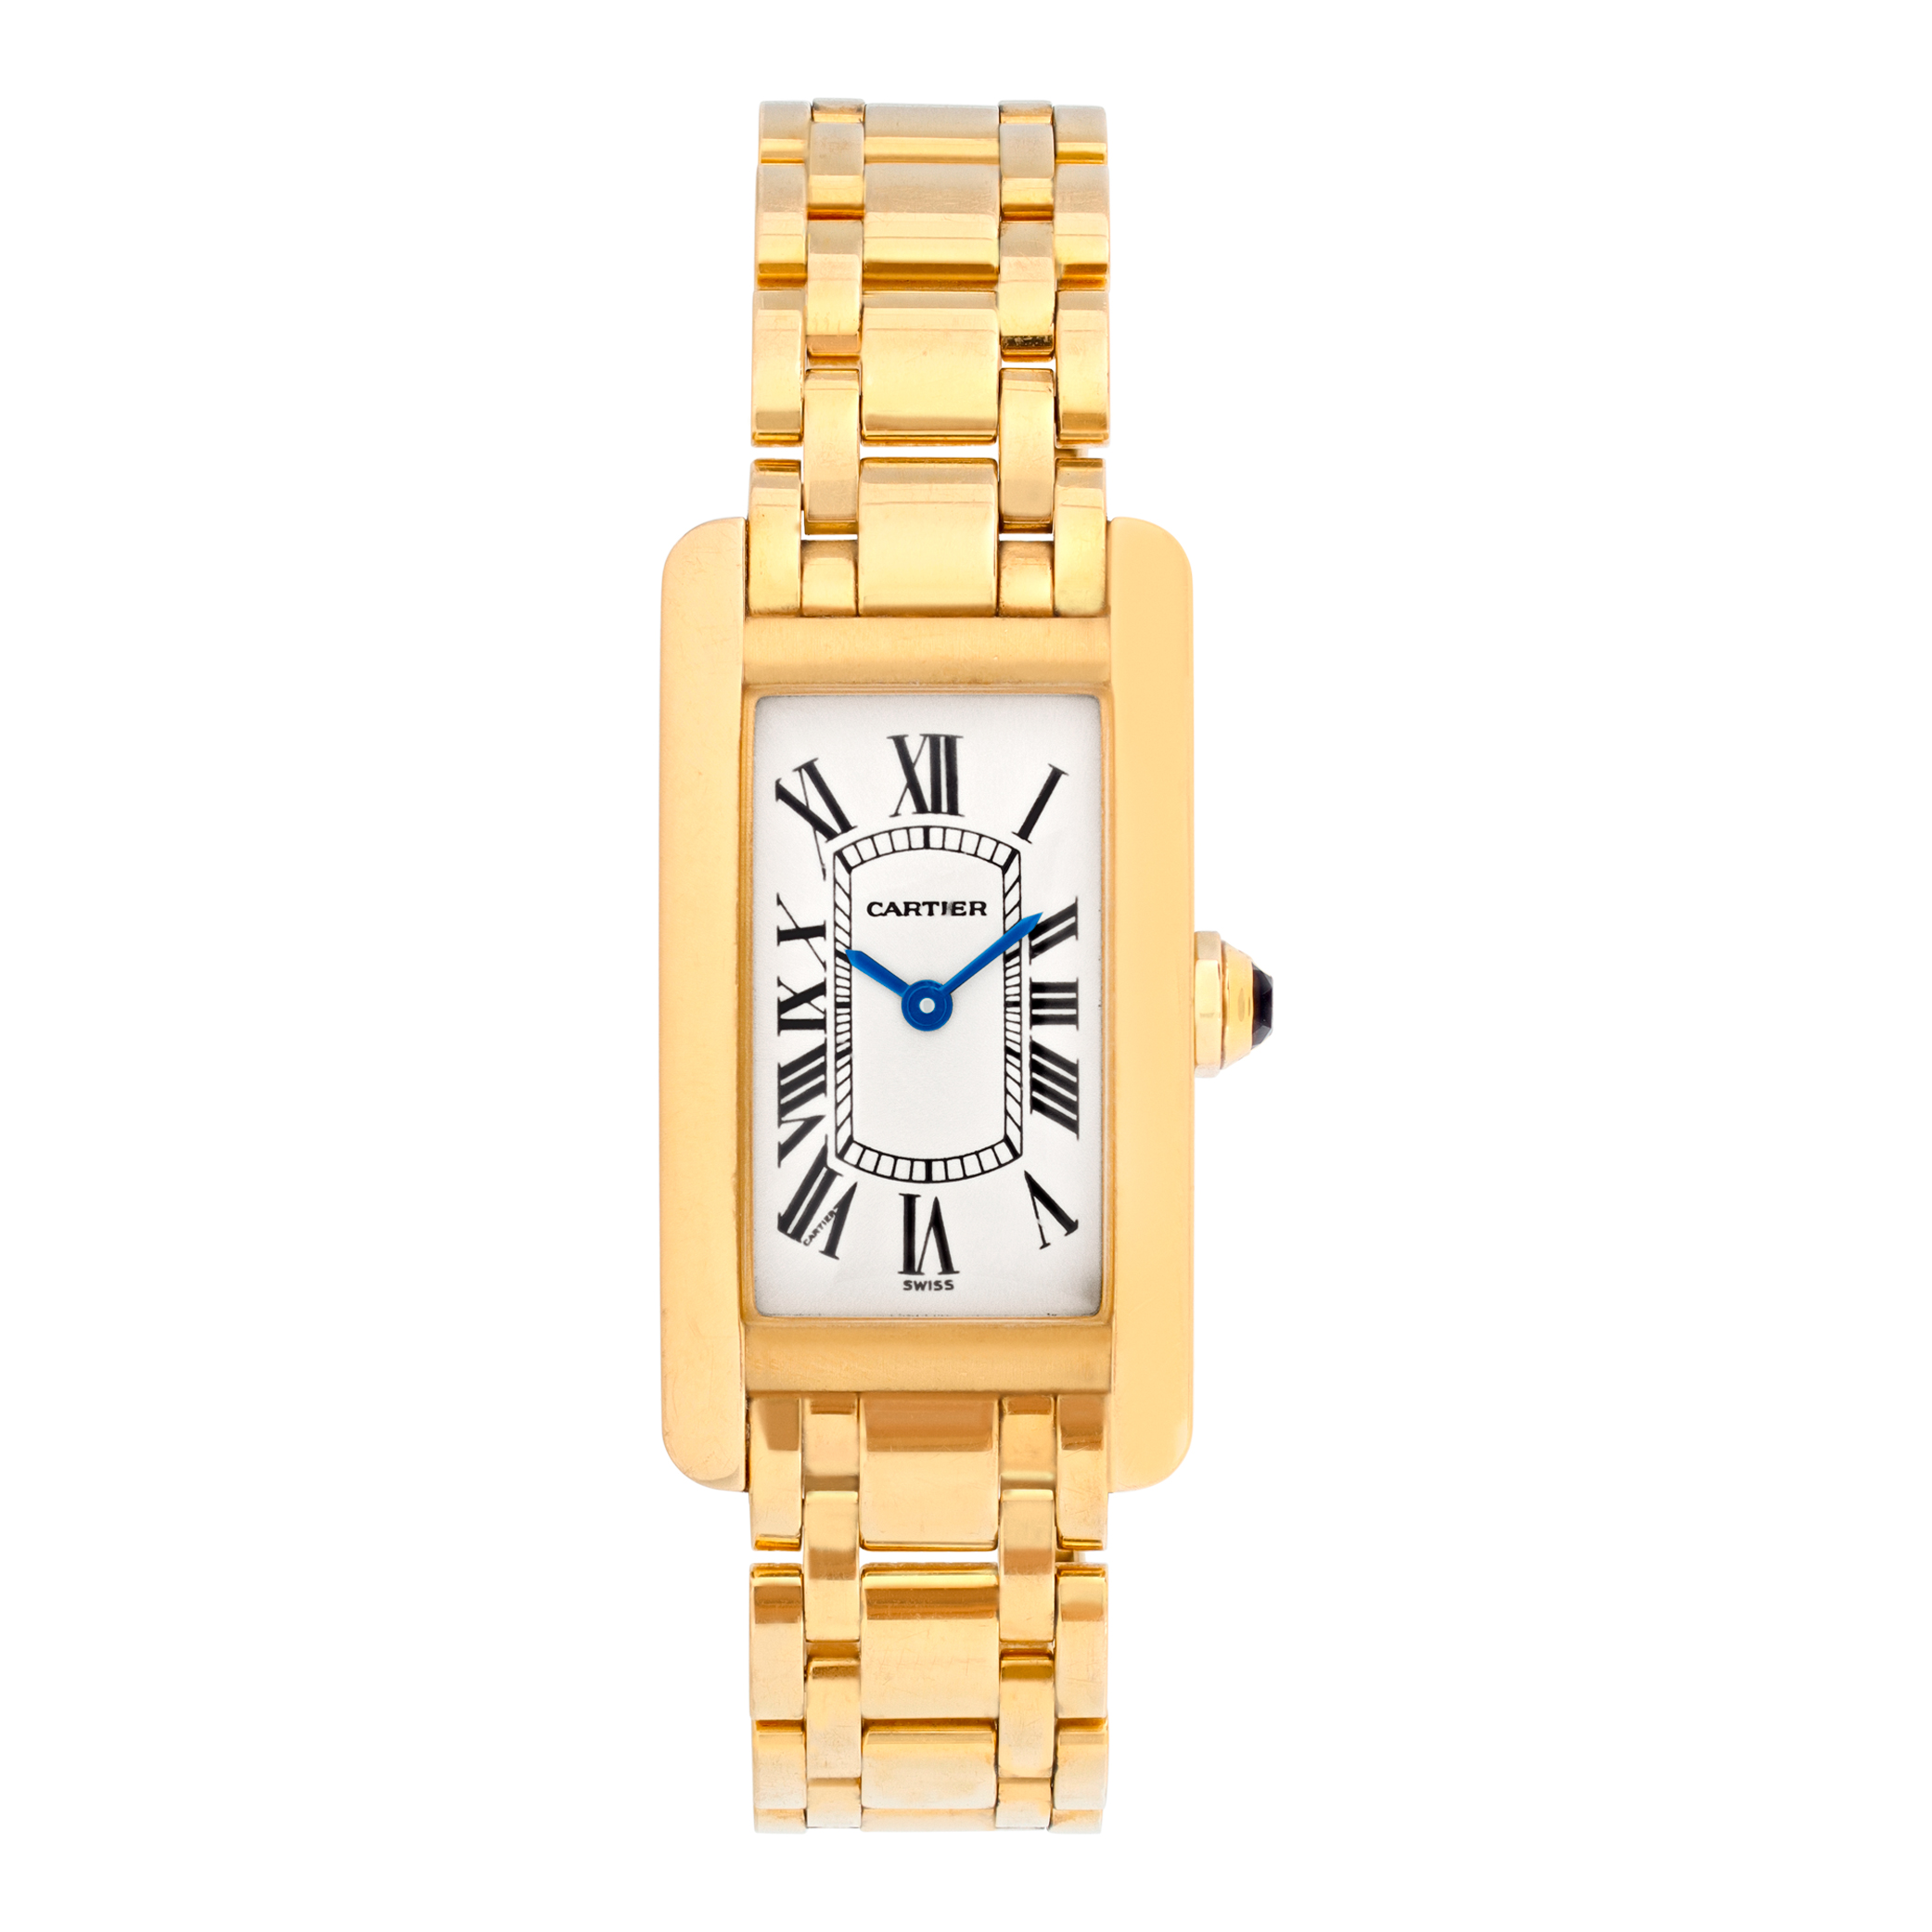 Cartier Tank Americaine 18mm 30410 SM (Watches)